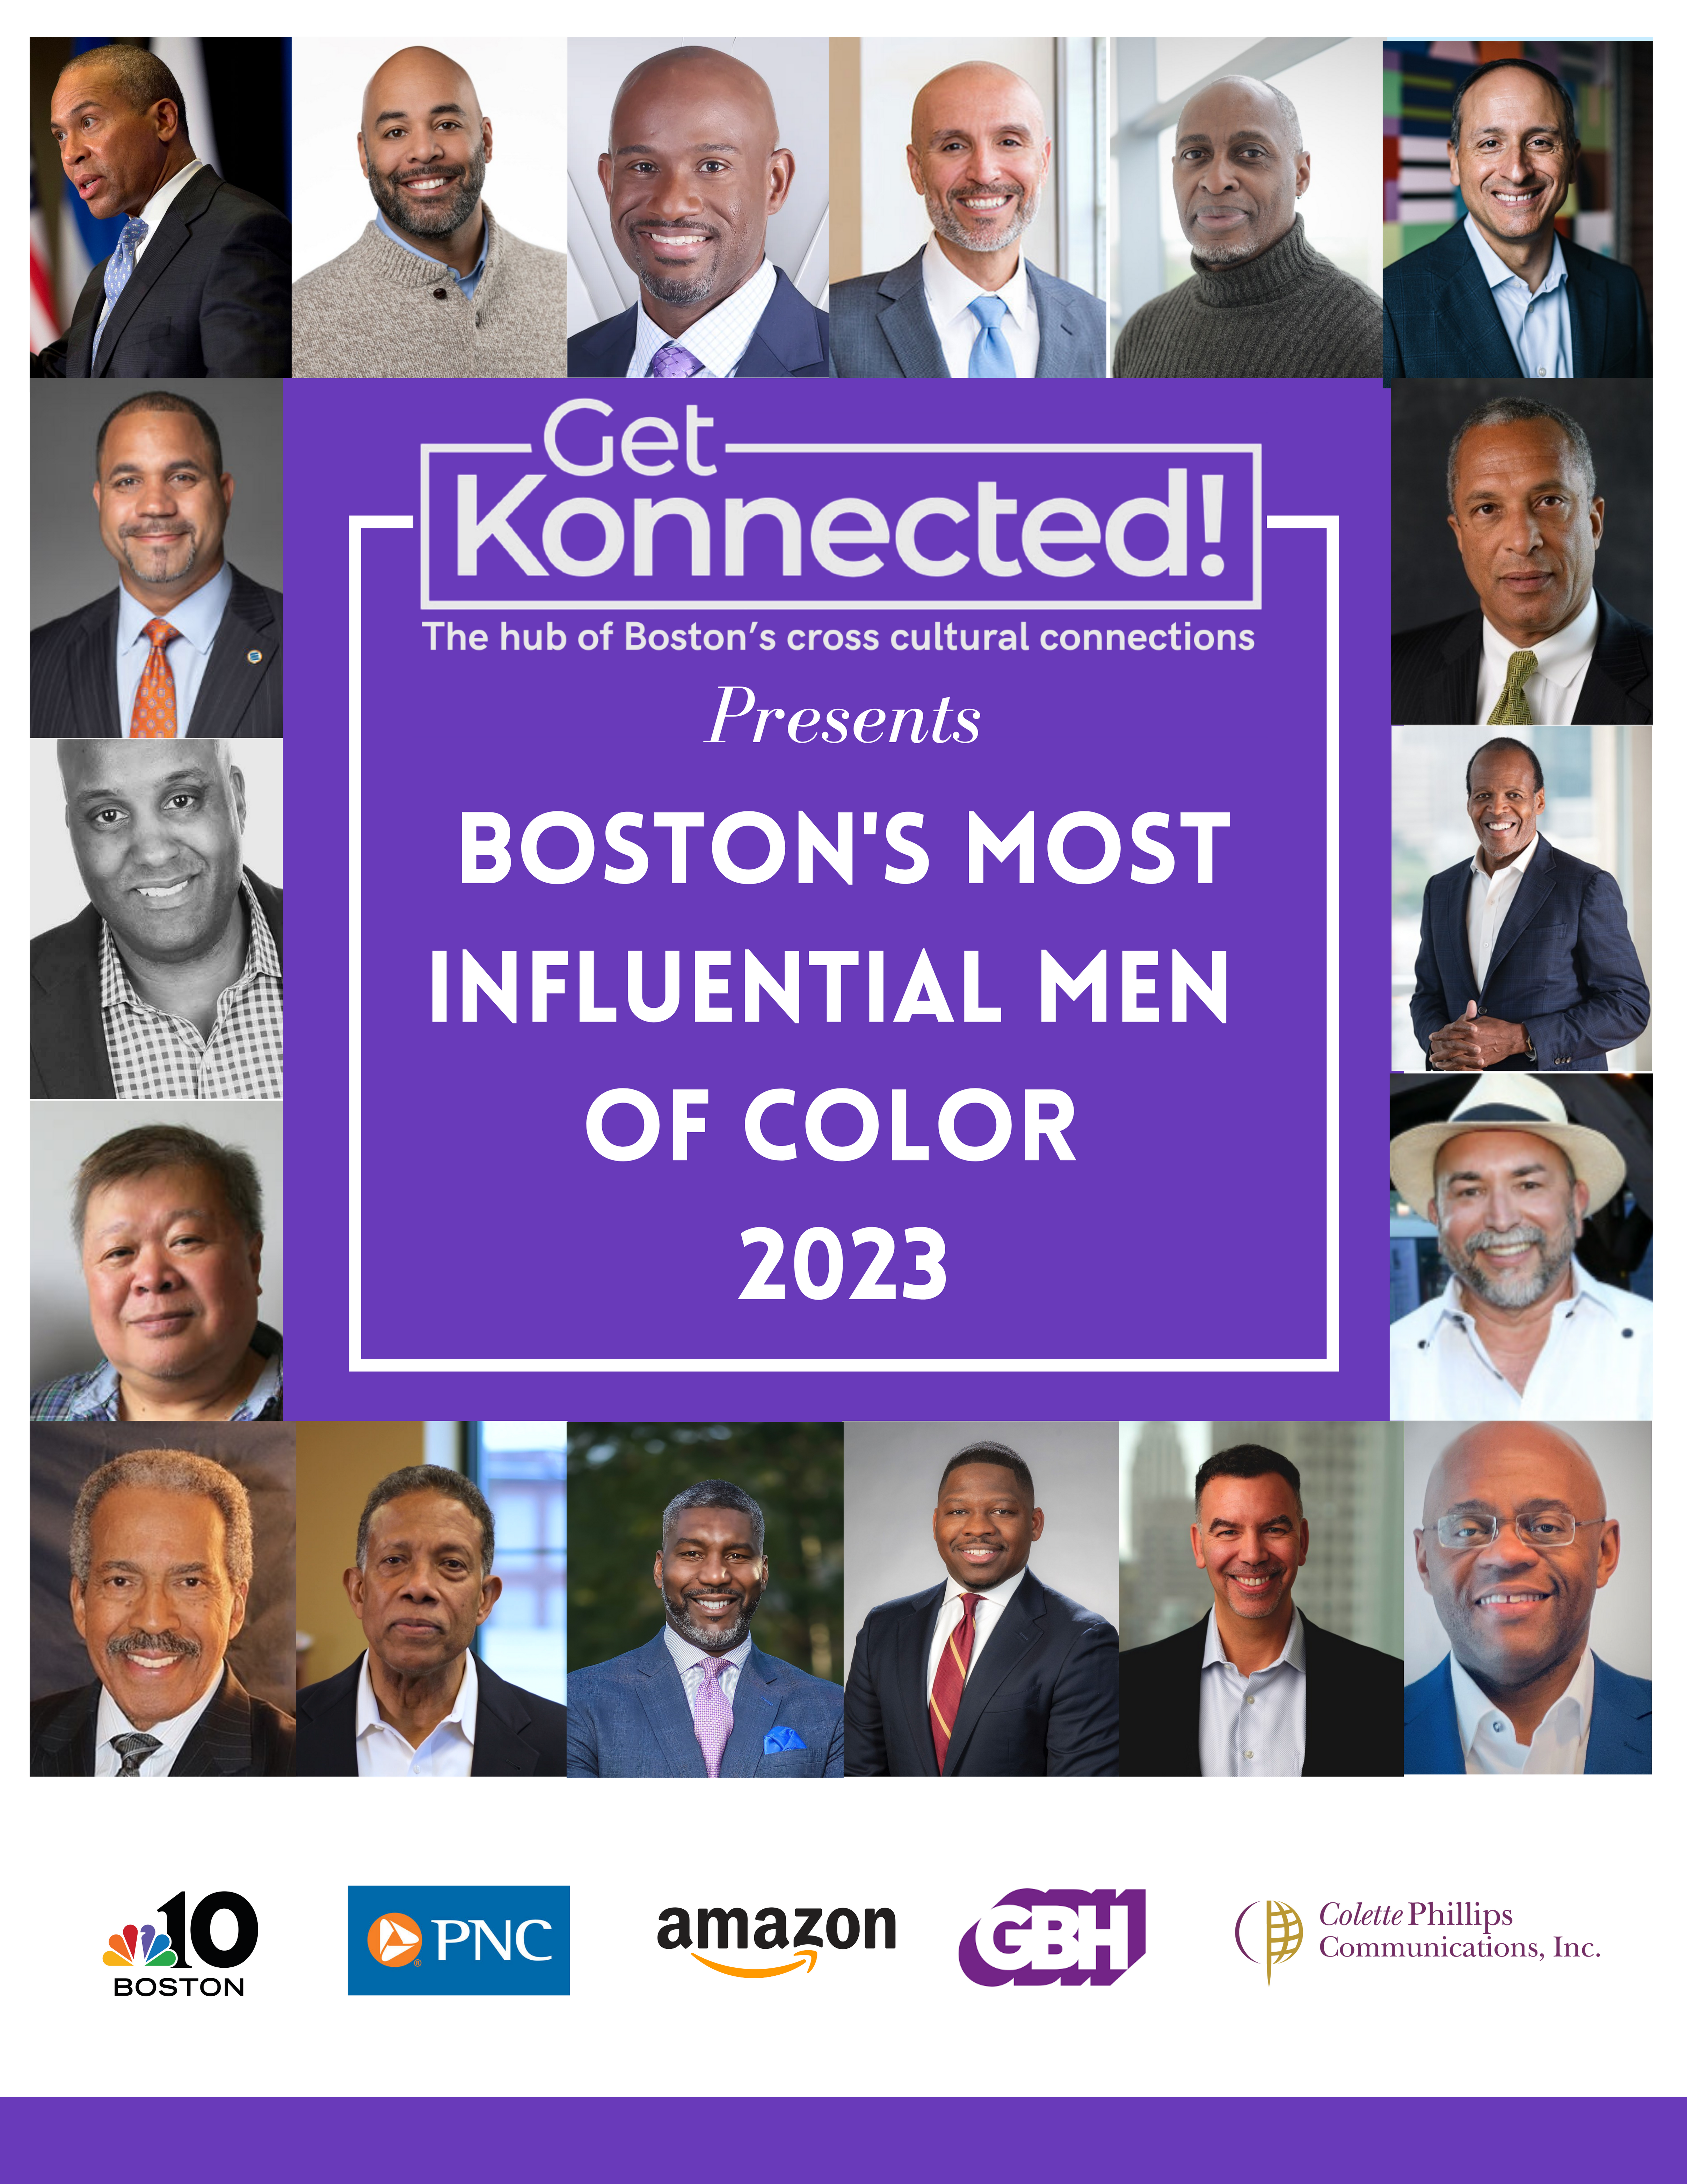 Boston's Most Influential Men of Color 